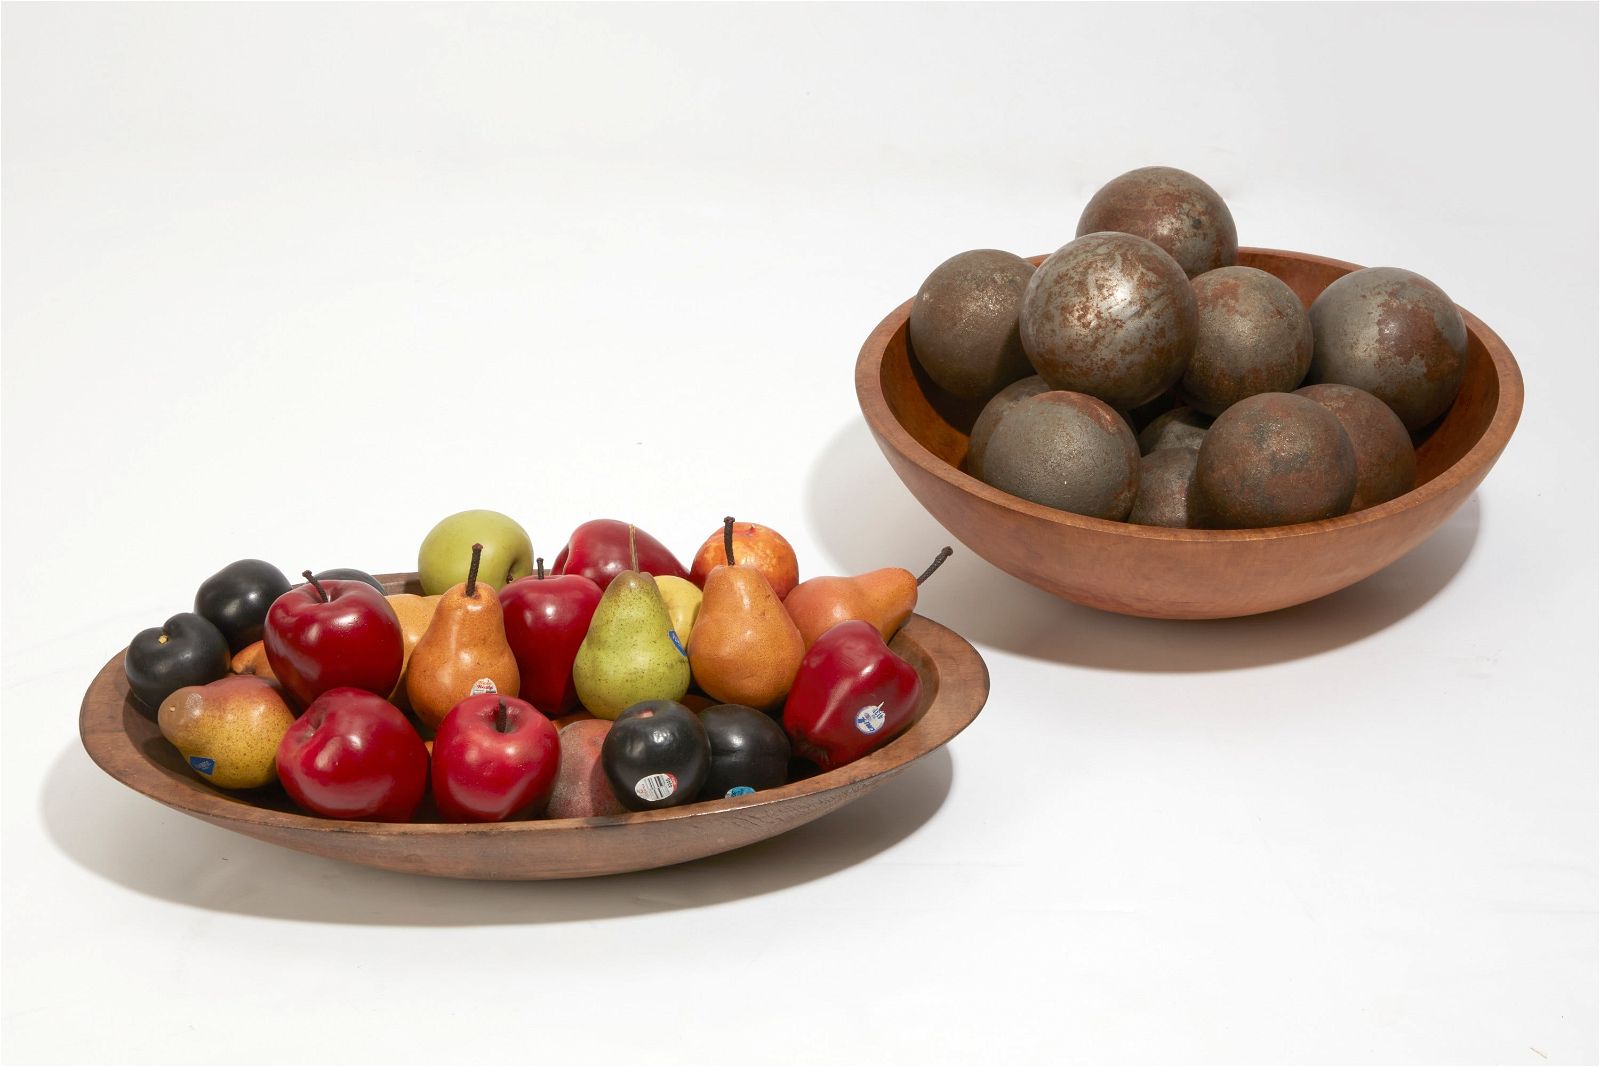 TWO FRUITWOOD BOWLS WITH SPHERES 2fb2ab0